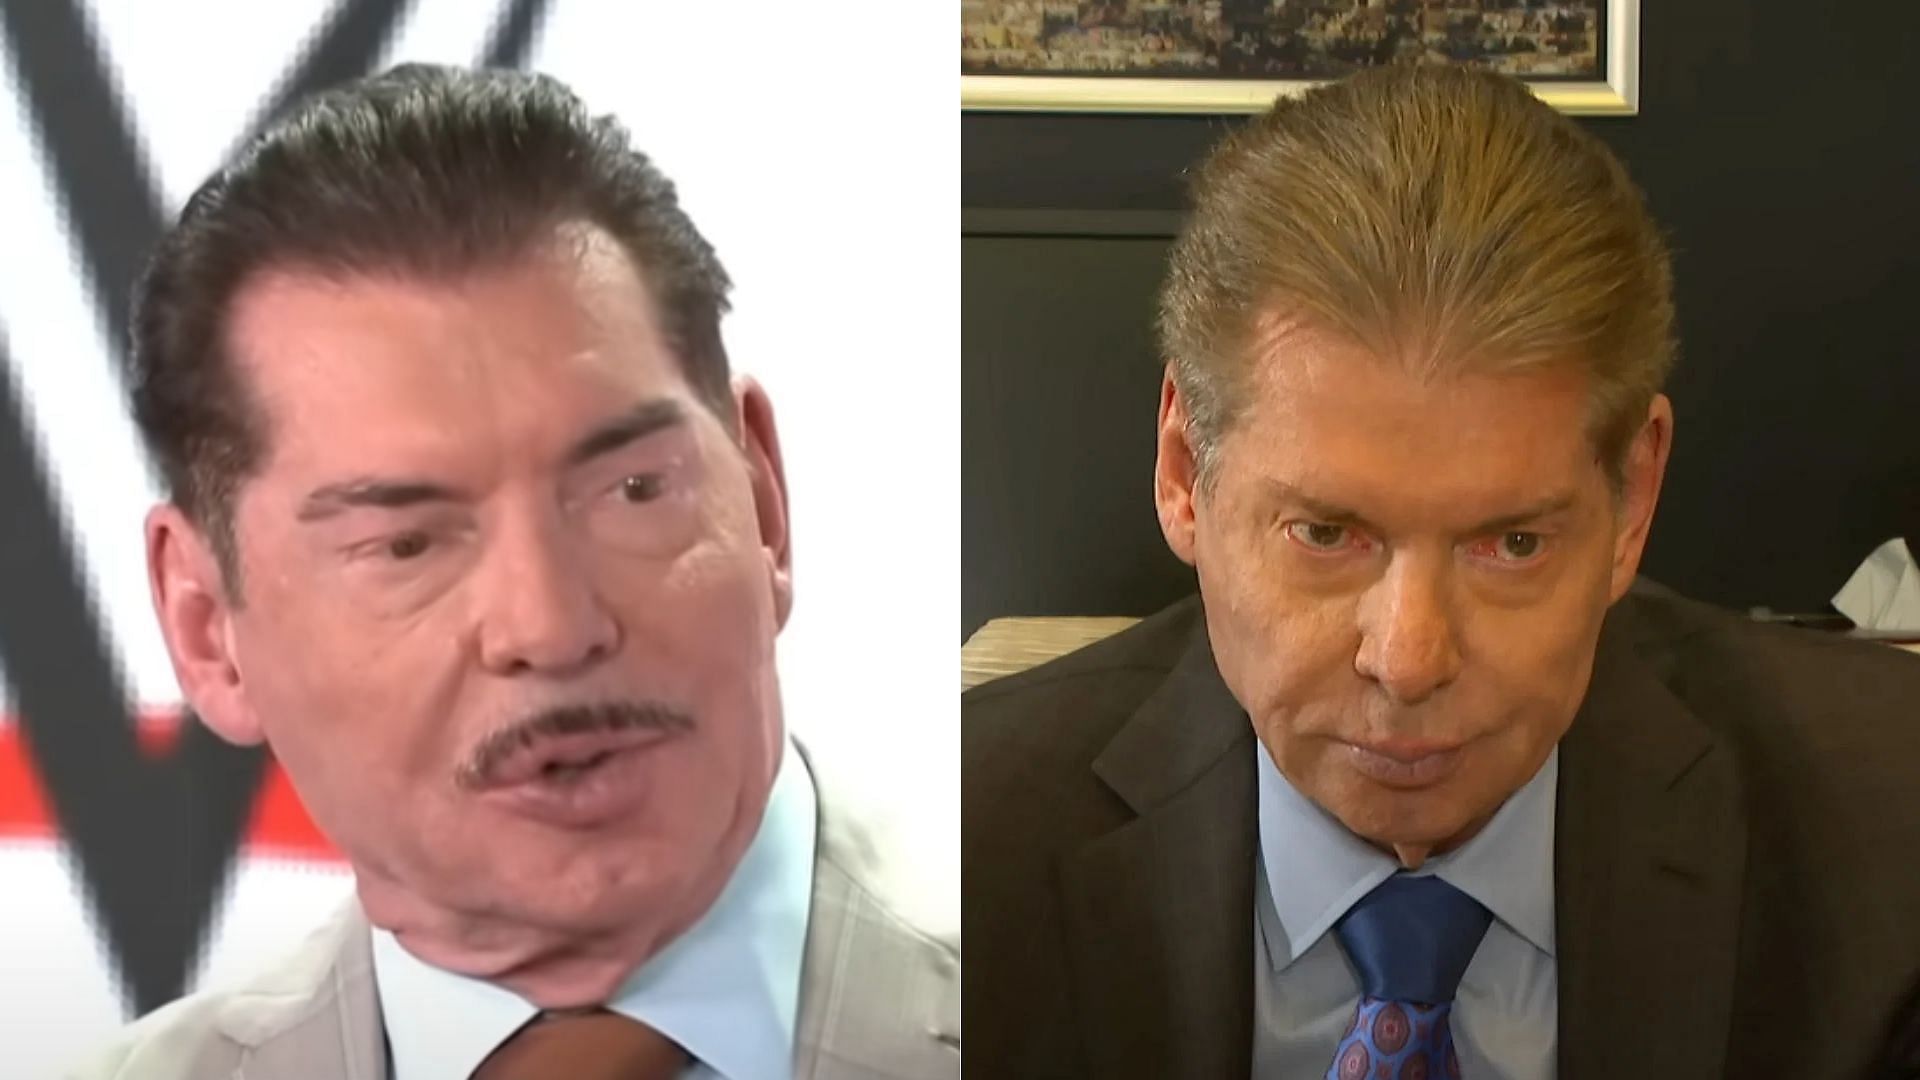 Vince McMahon surprised many with his new appearance